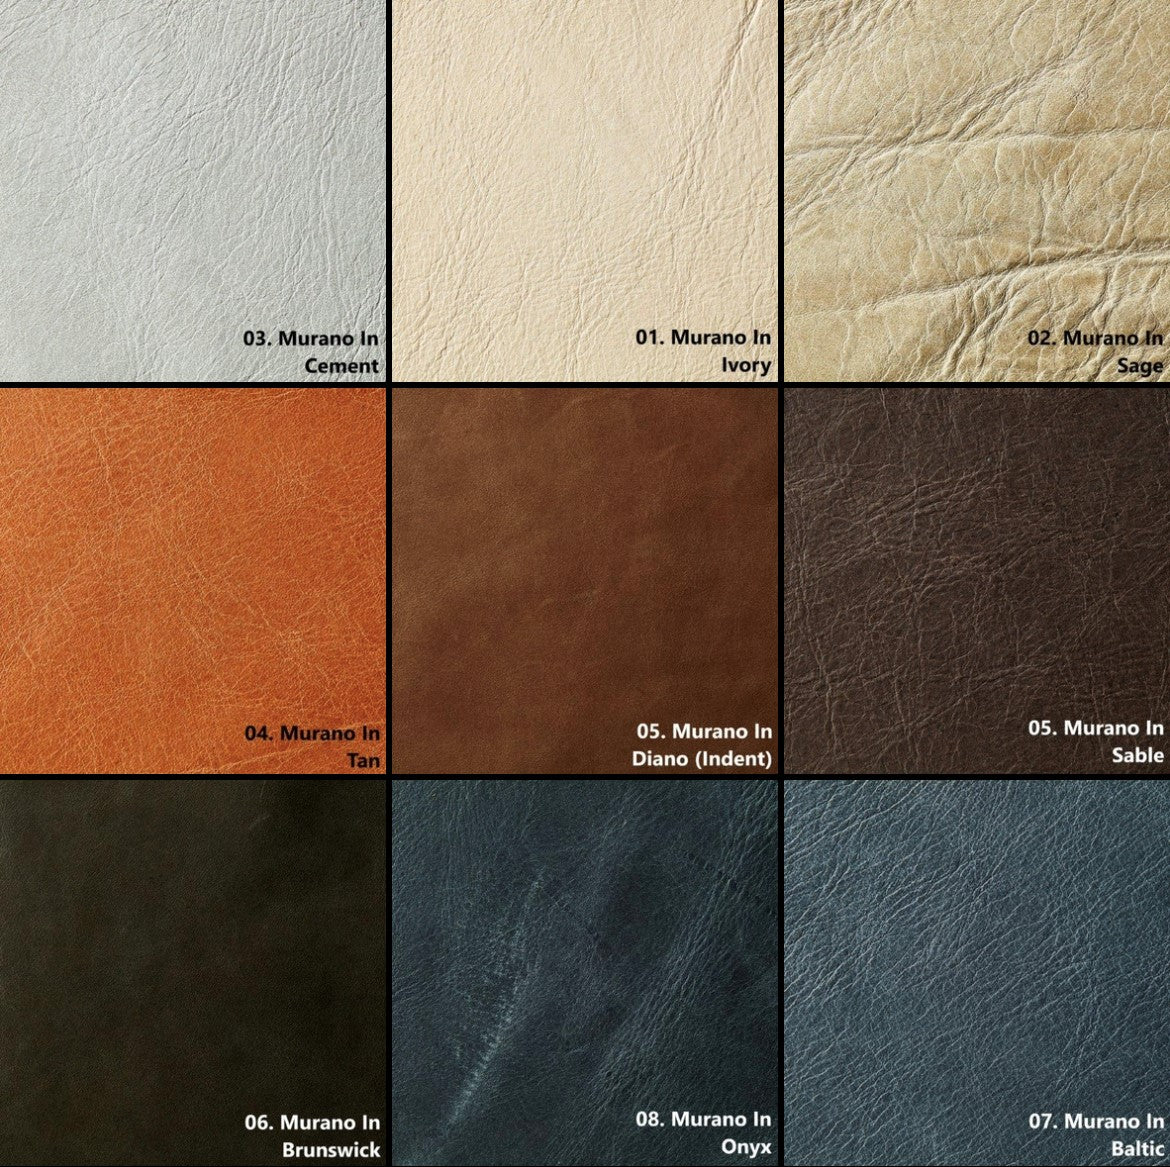 Murano Upholstery Hides | Sable | 0.9mm | 4.8 sq.m